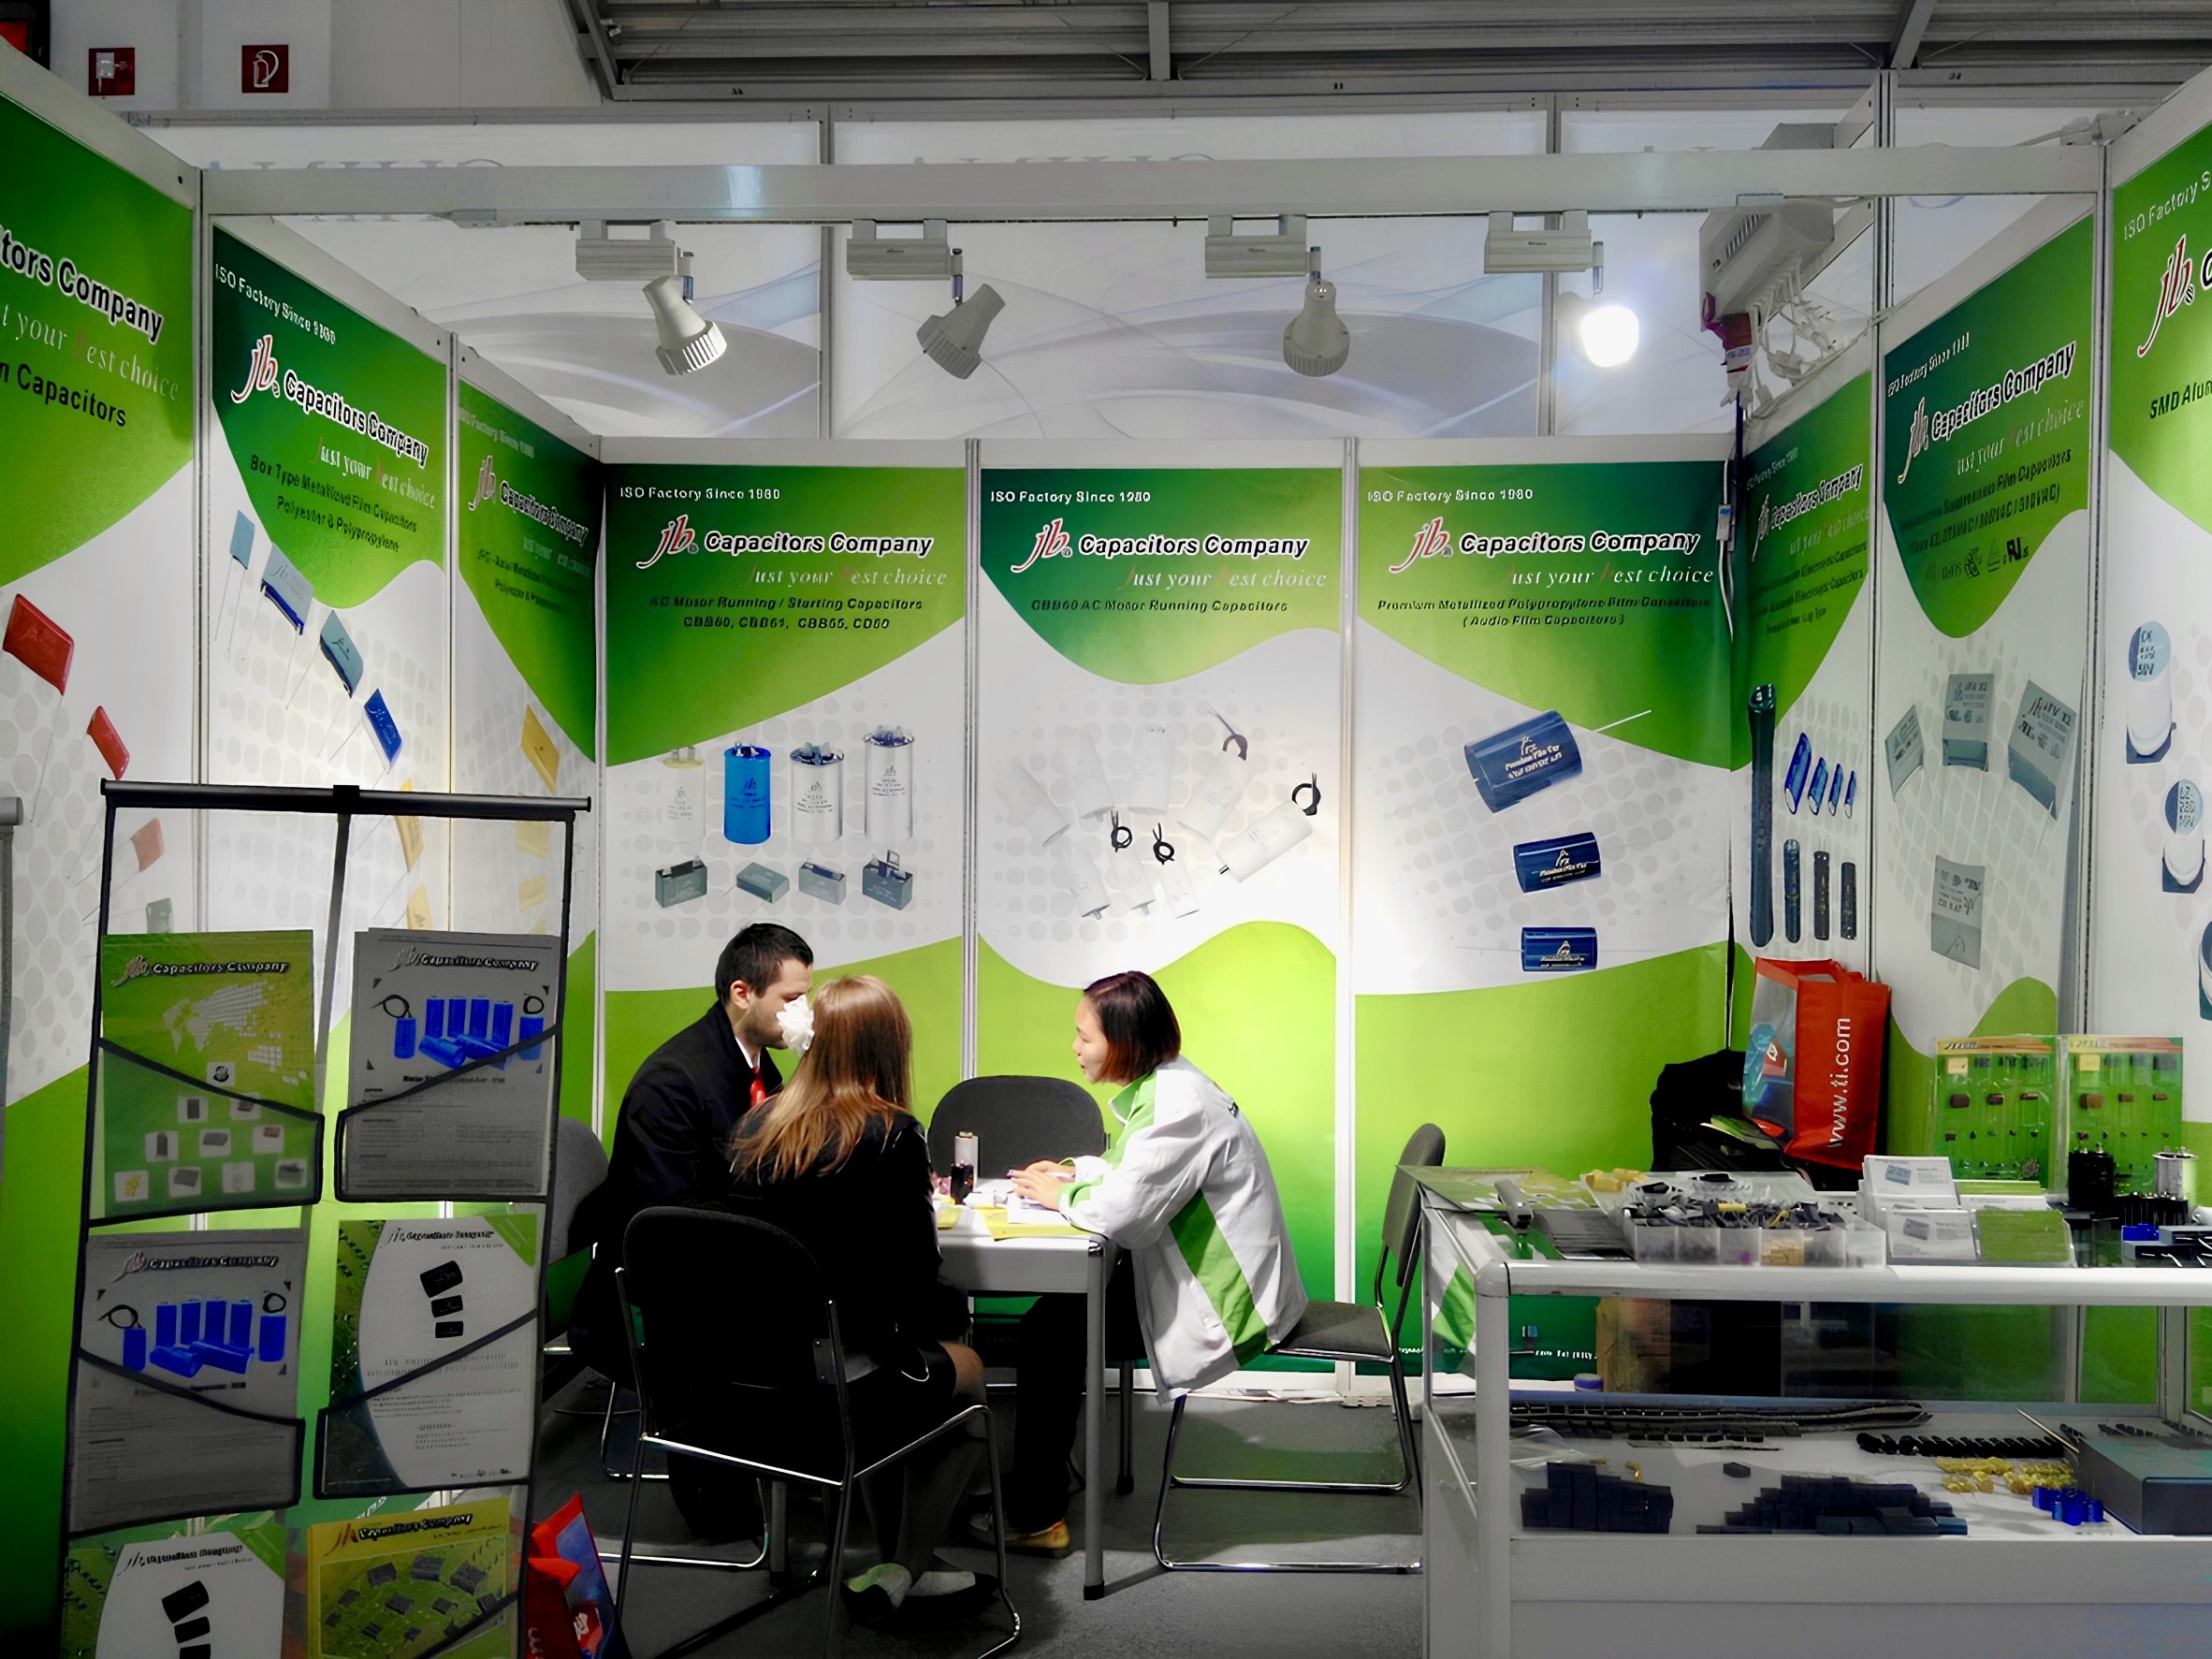 jb - Electronica 2014 in Germany, jb Booth No.: To be advised.